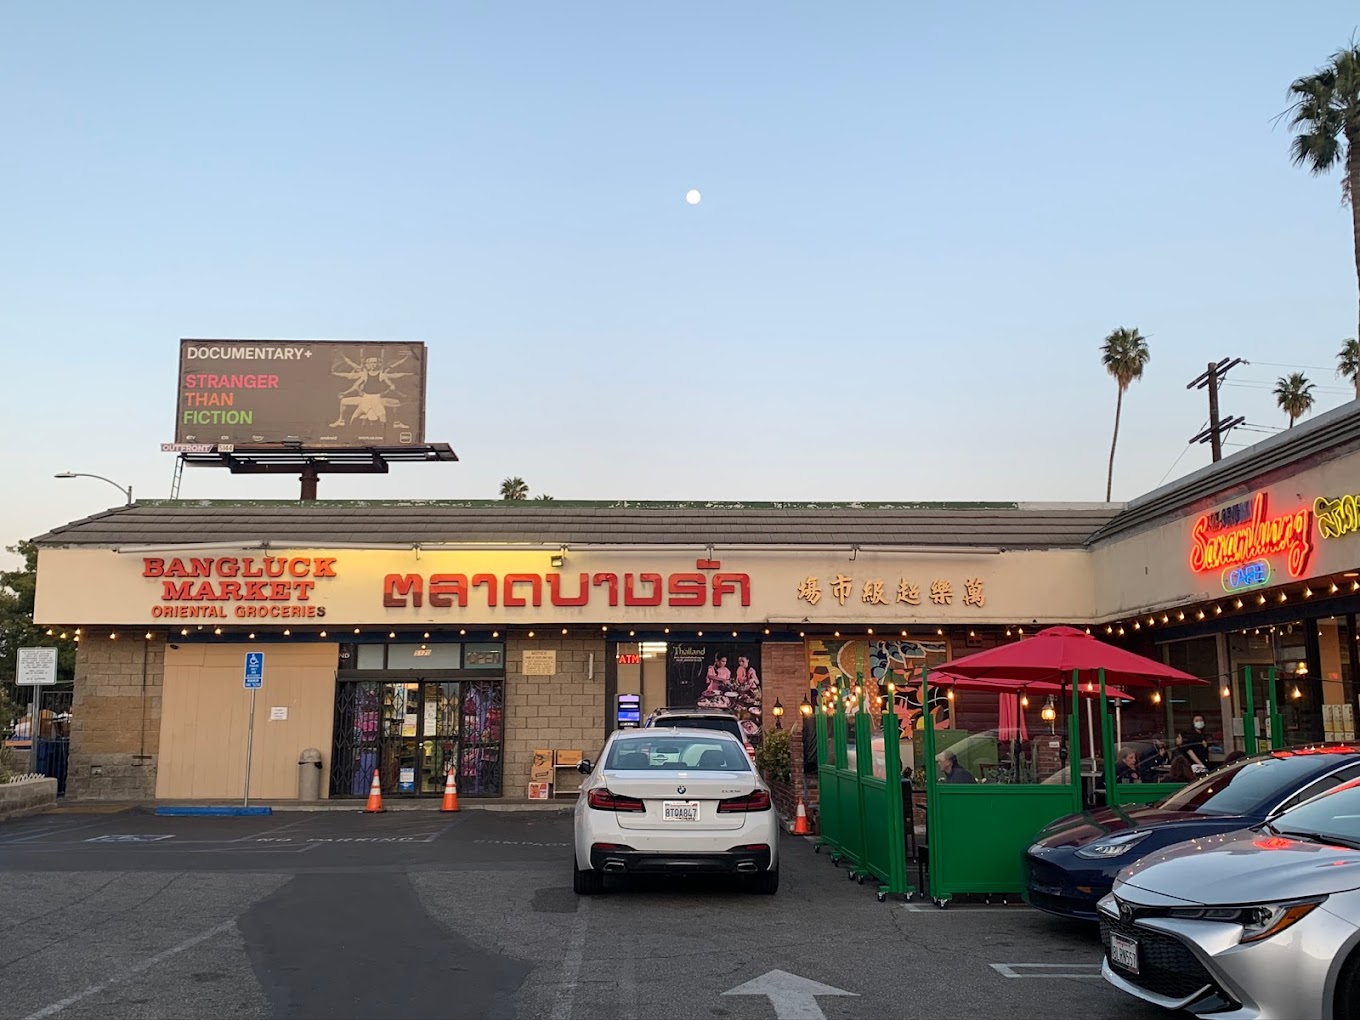 BANGLUCK MARKET Hollywood~Thaitown. An Asian Grocery Store in Los Angeles